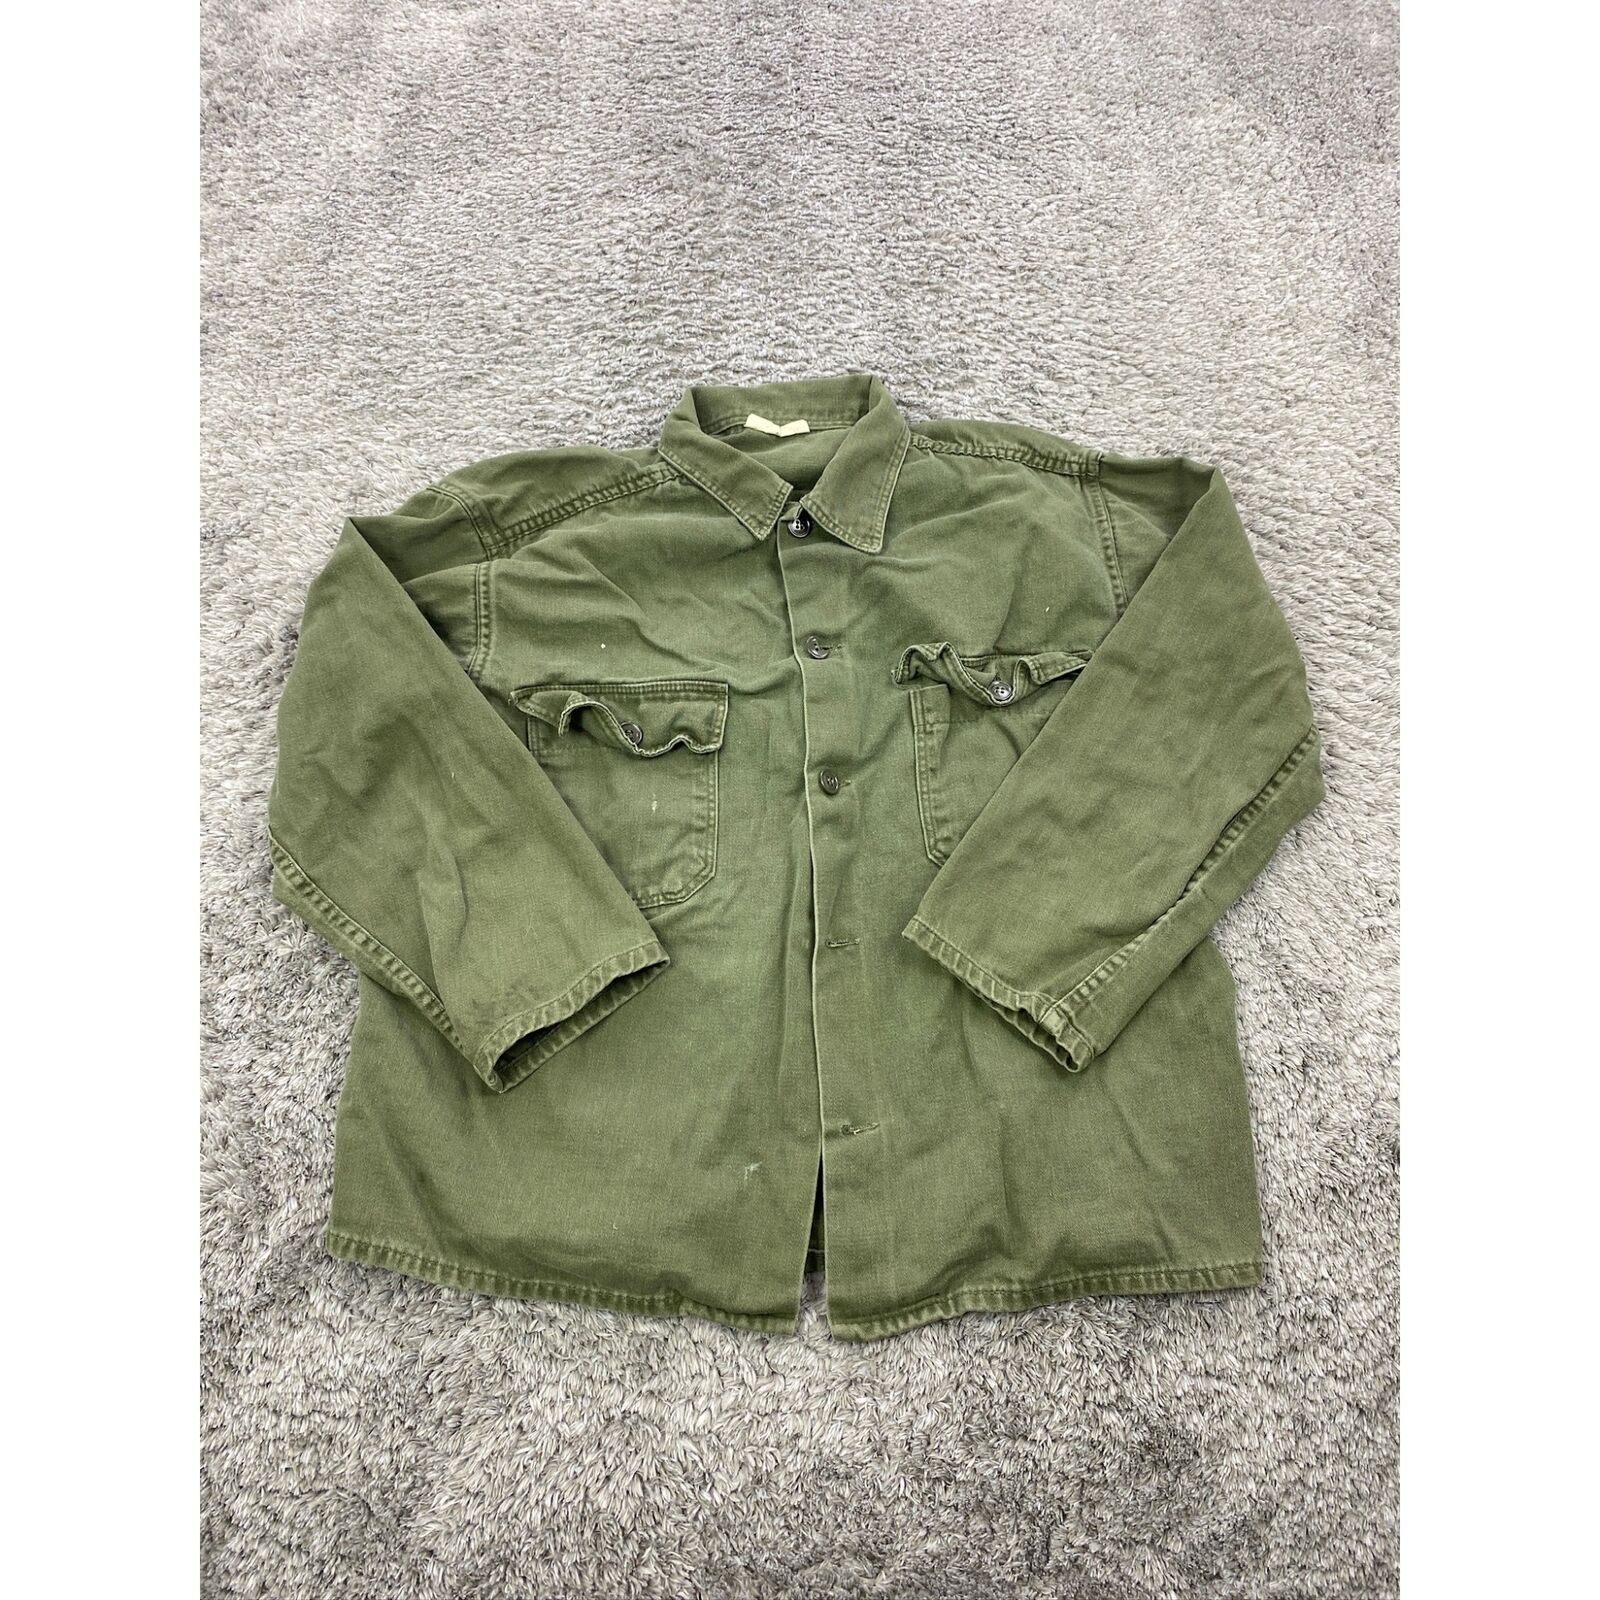 Vintage OG-107 Field Shirt Mens Large 16x34 Sateen Green Cotton Military 70s 80s